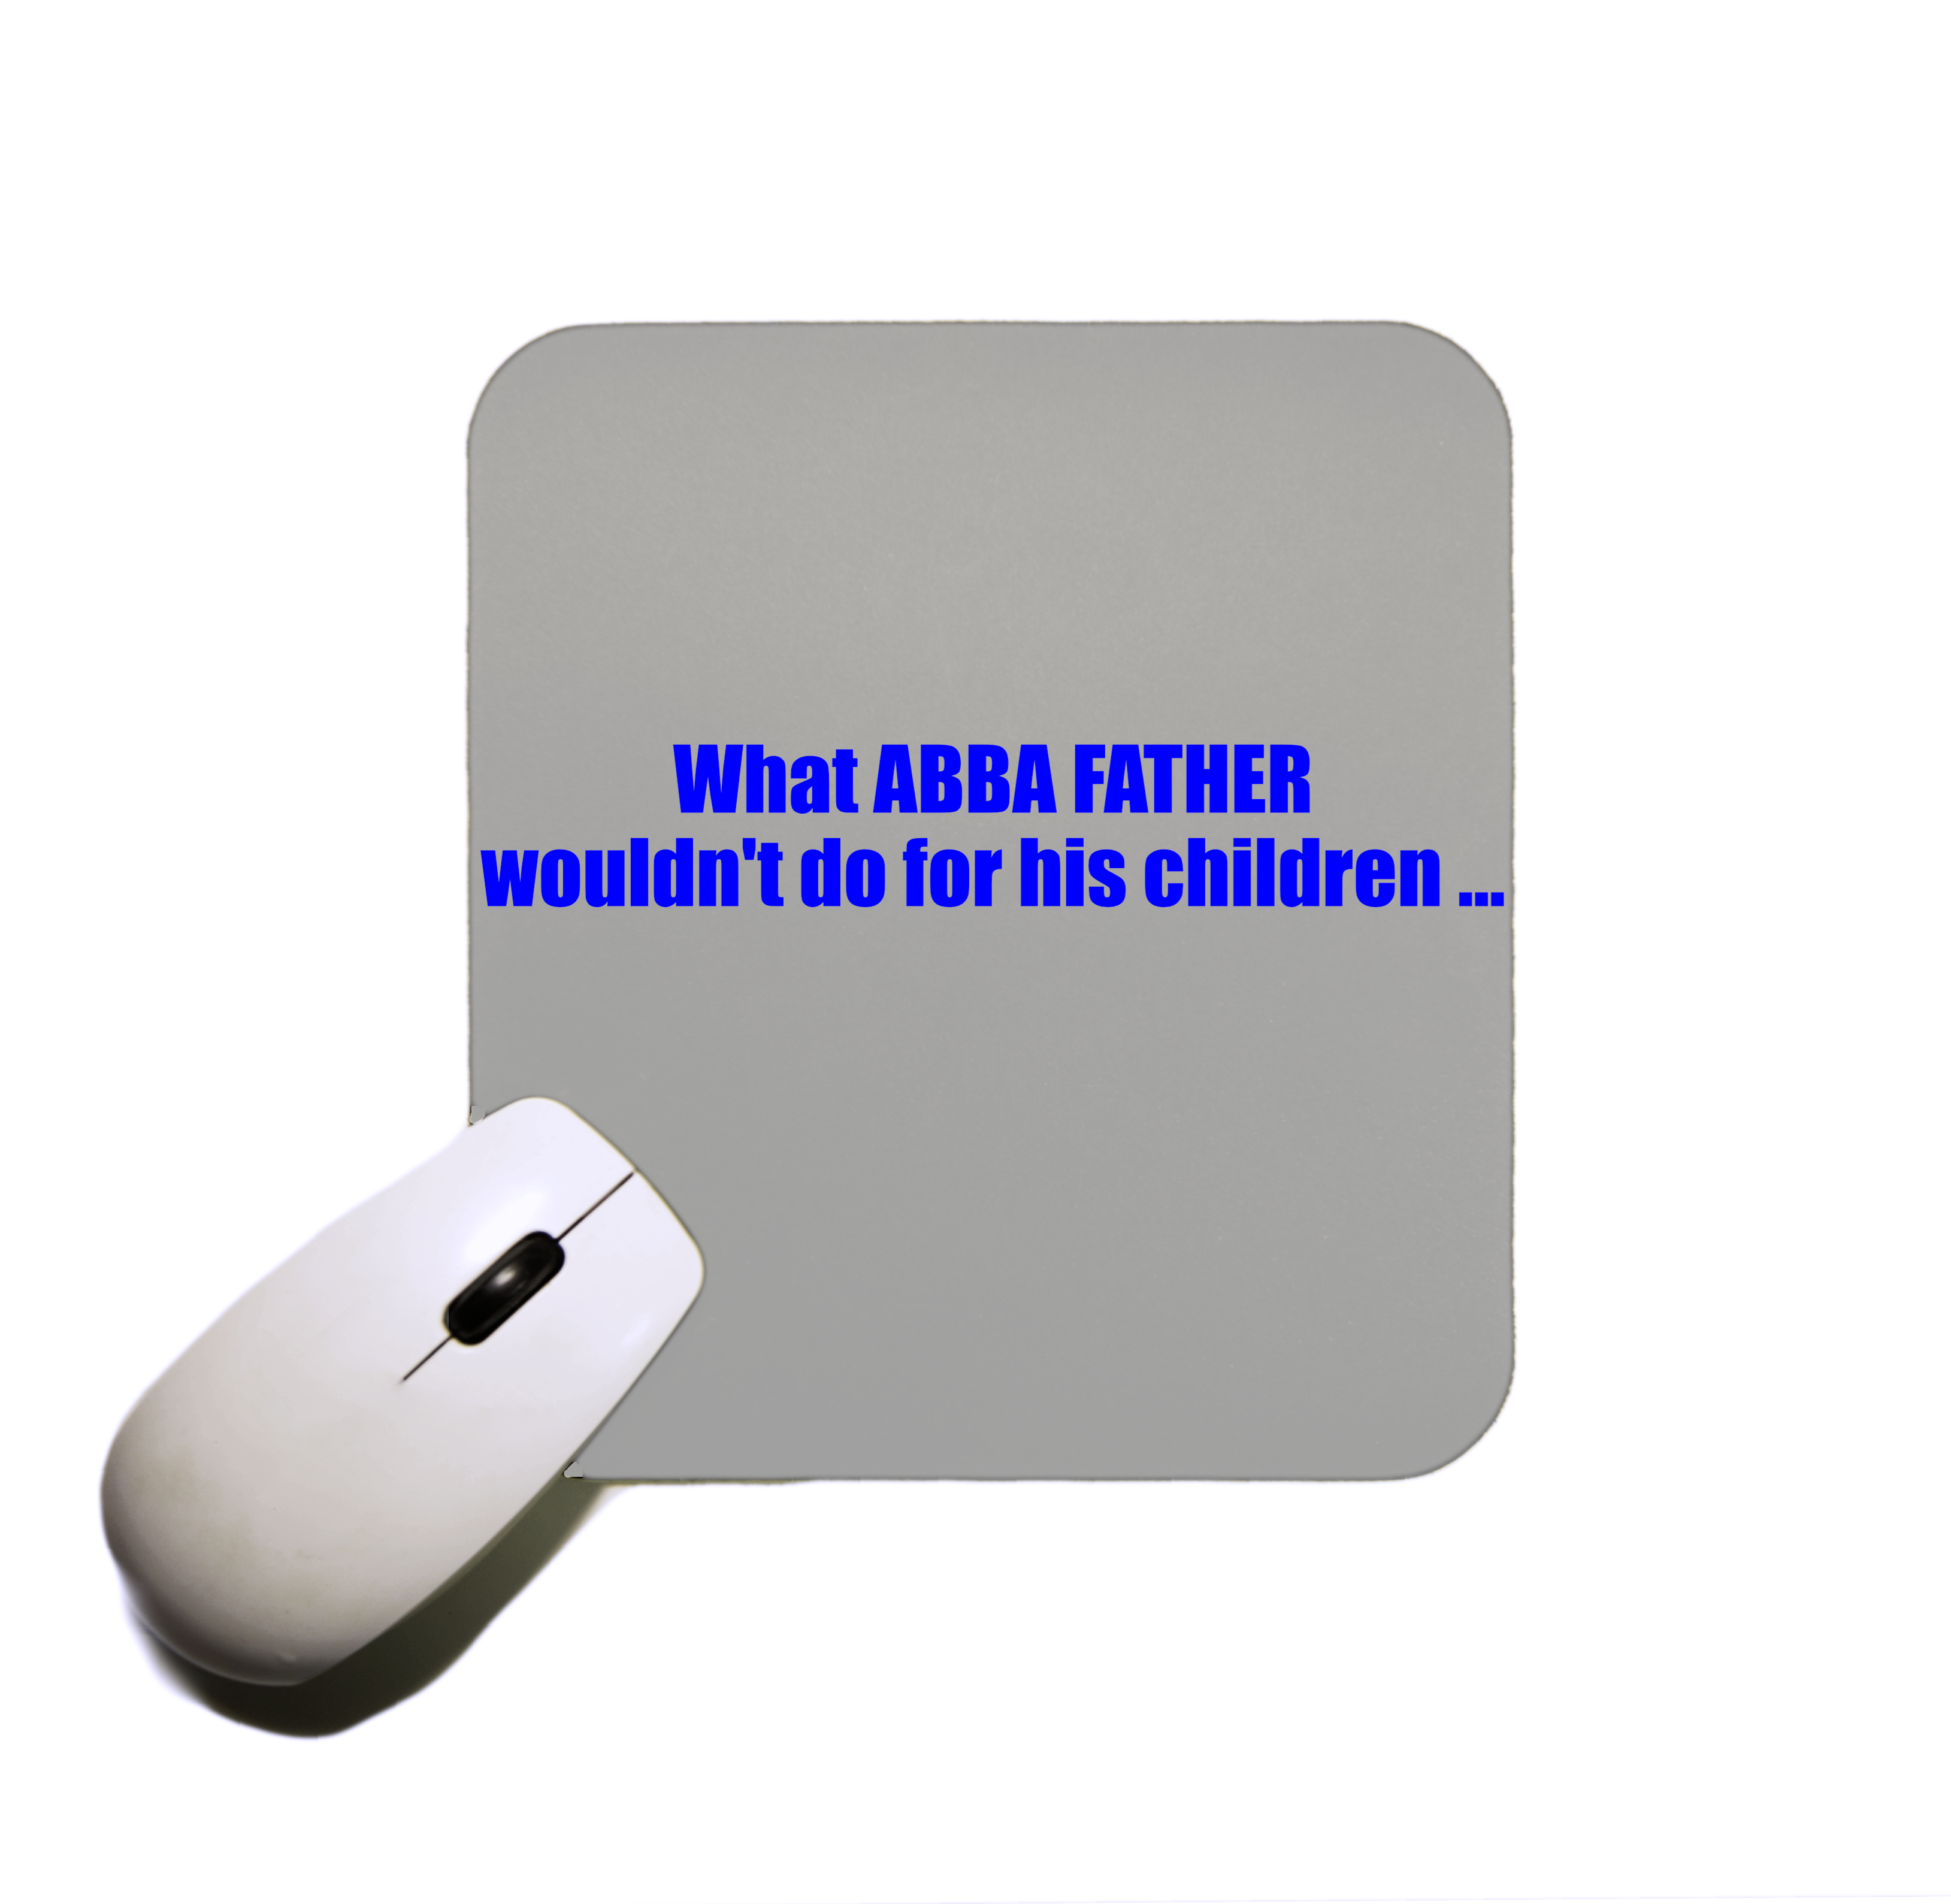 The Abba Father Mouse Pad